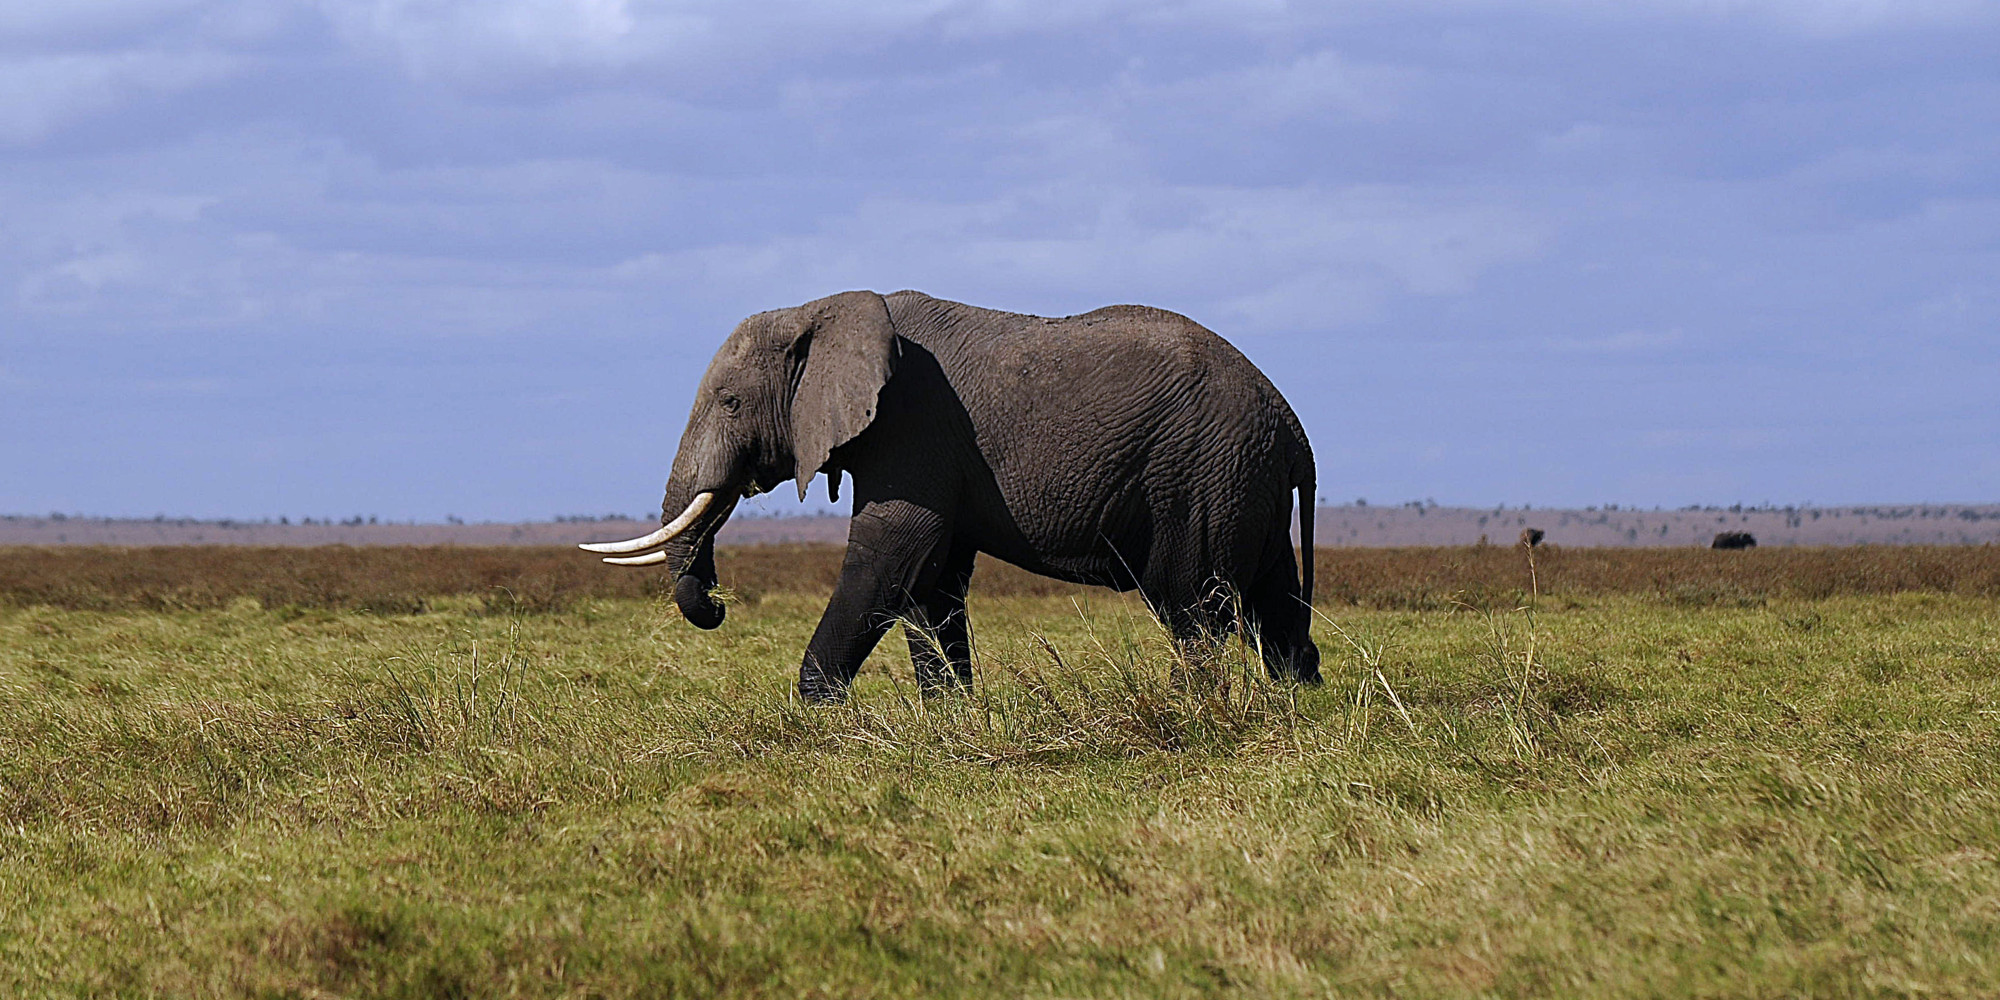 Tanzania Suspends Campaign Against Elephant Poaching To Investigate ...